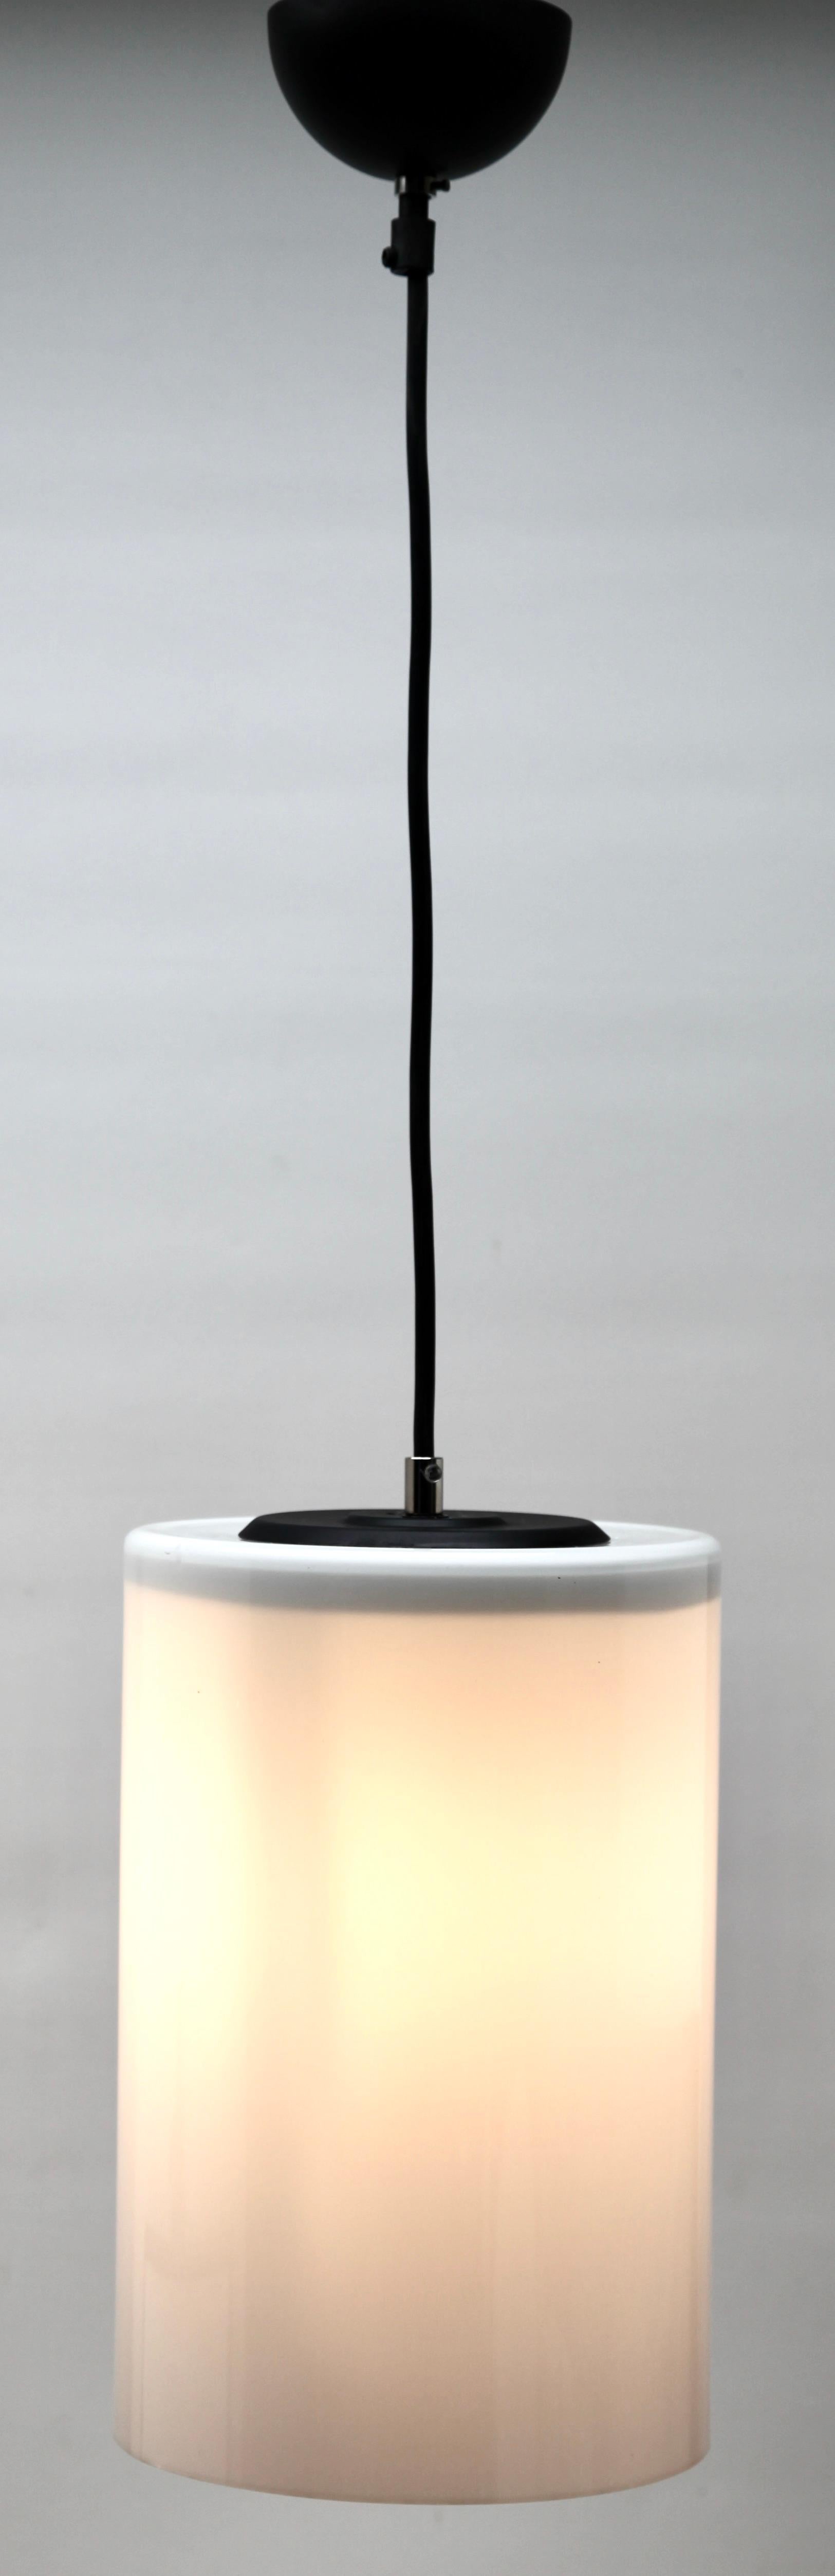 Pendant Lamp with a Cylinder Shape Opaline Shade, 1930s, Netherlands For Sale 1